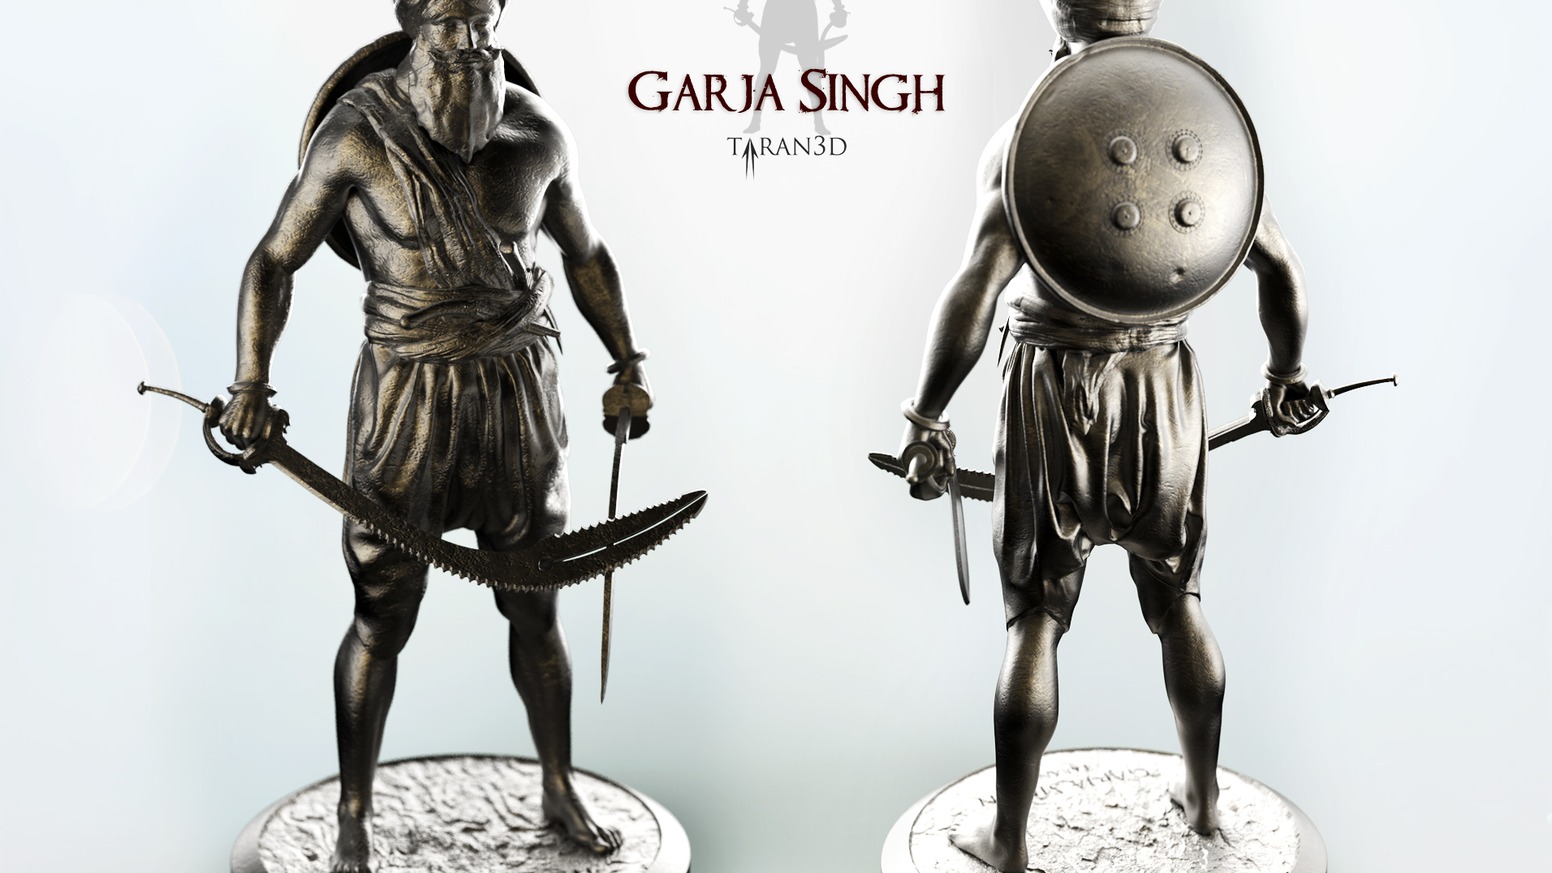 Help me produce these 12" (30cm) statues of famous 18th century Sikh warrior Garja Singh in cold cast bronze and get one for yourself